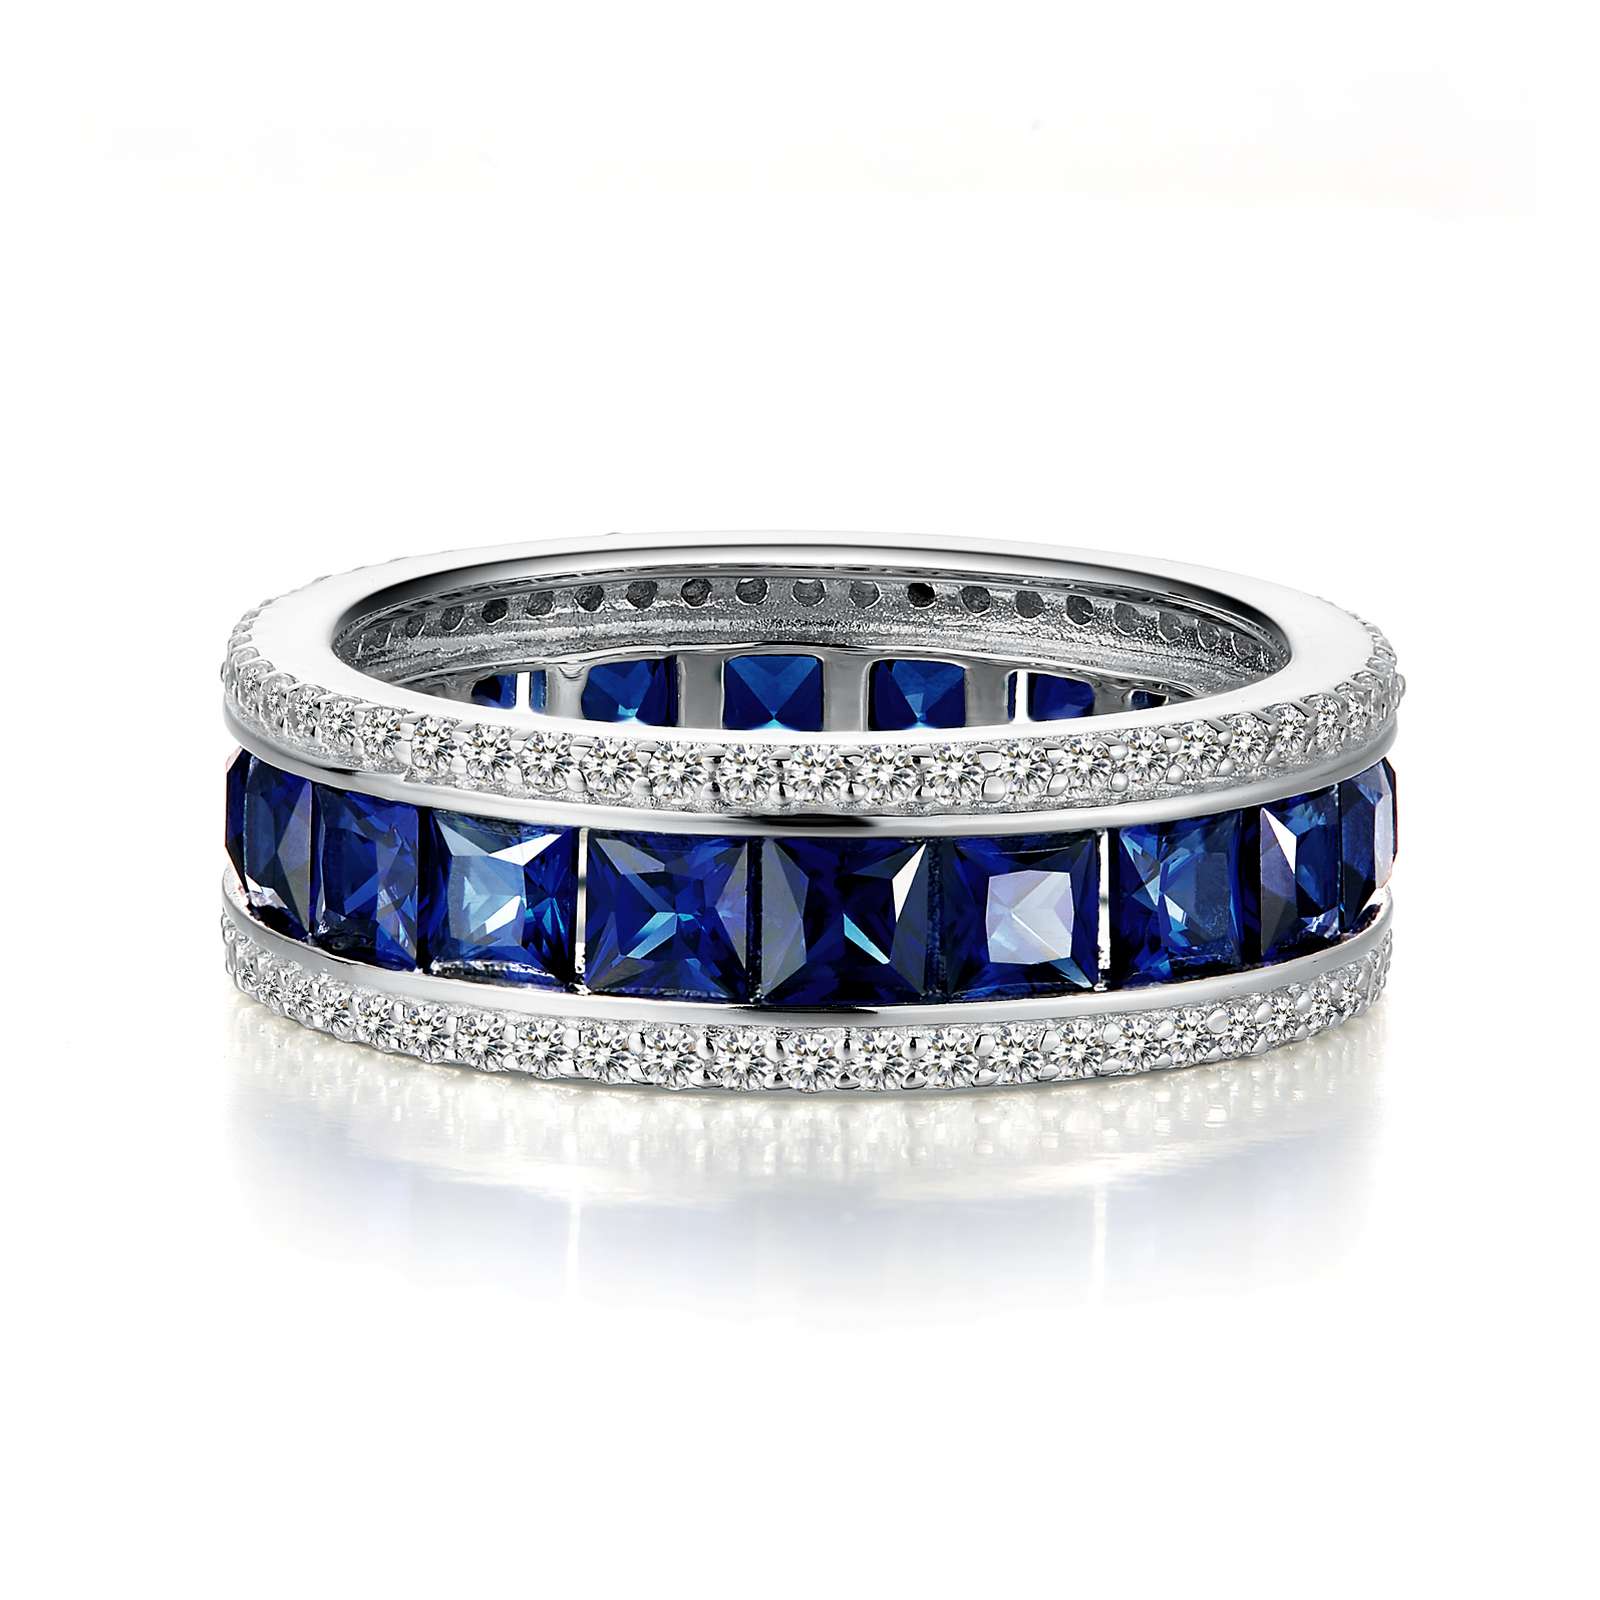 Classic Simulated Diamond And Synthetic Sapphire Platinum Bonded Ring Griner Jewelry Co. Moultrie, GA